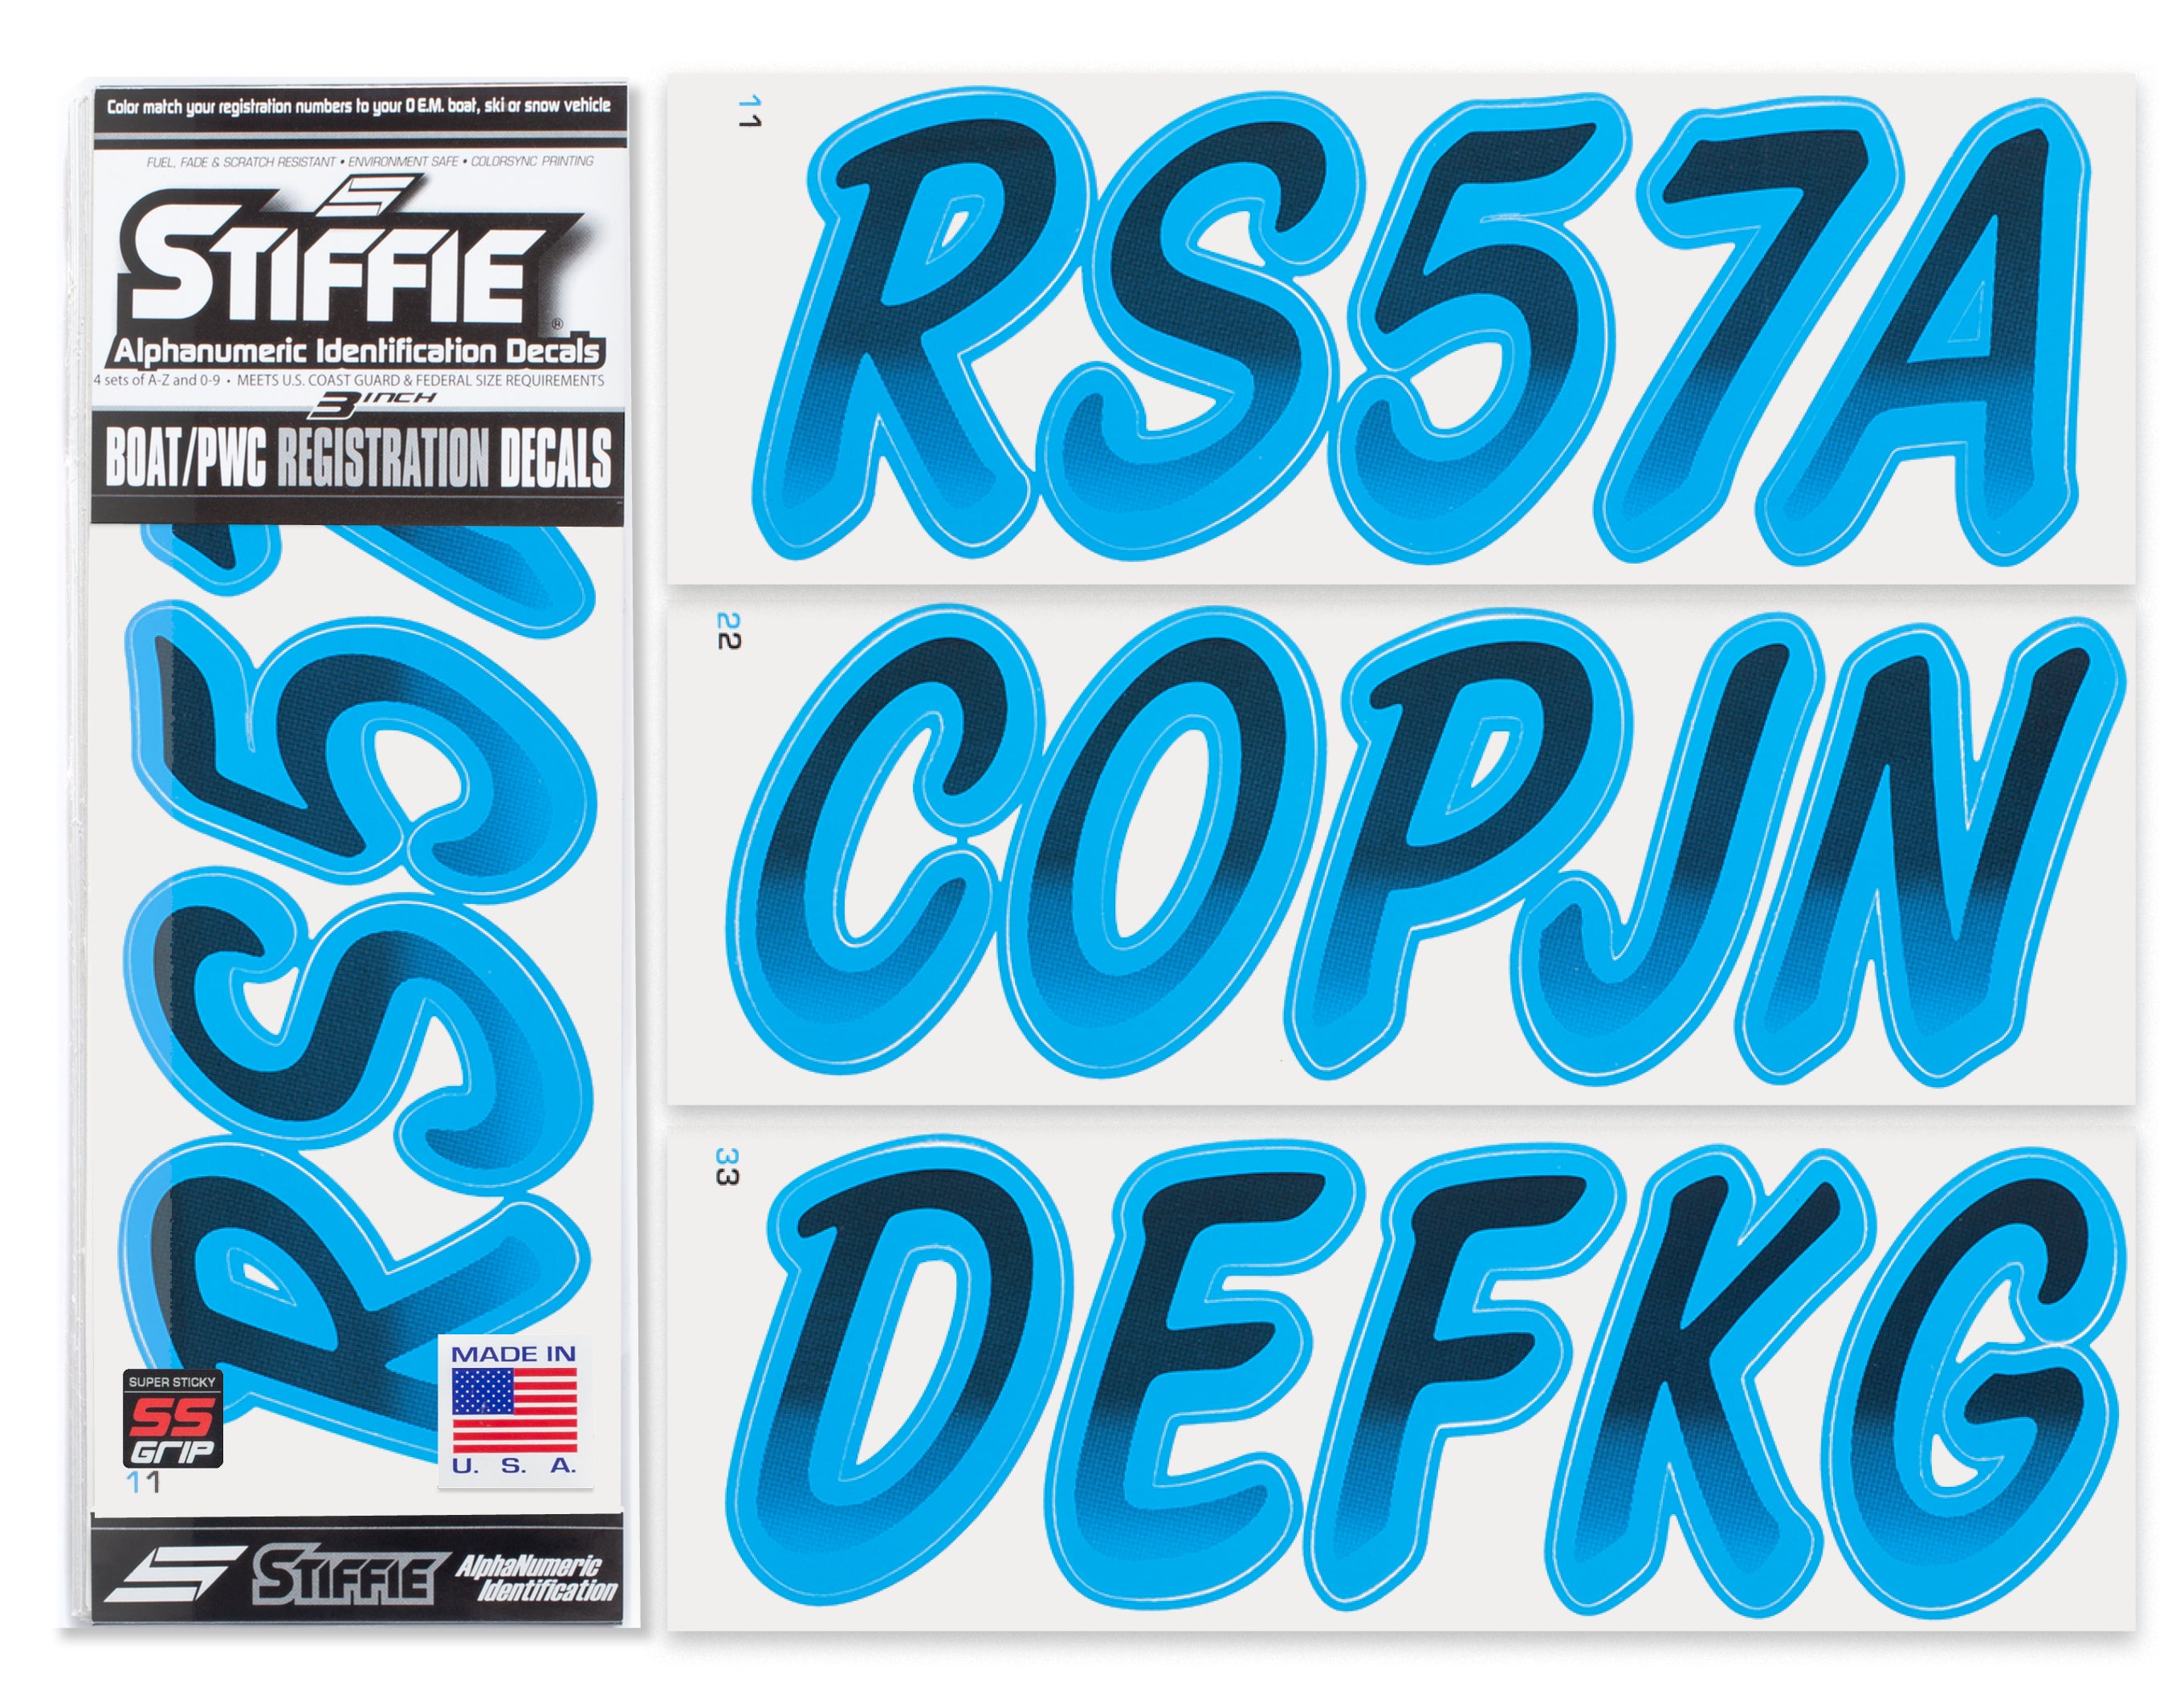 STIFFIE Whipline Black/Blueberry Super Sticky 3" Alpha Numeric Registration Identification Numbers Stickers Decals for Sea-Doo Spark, Inflatable Boats, Ribs, Hypalon/PVC, PWC and Boats